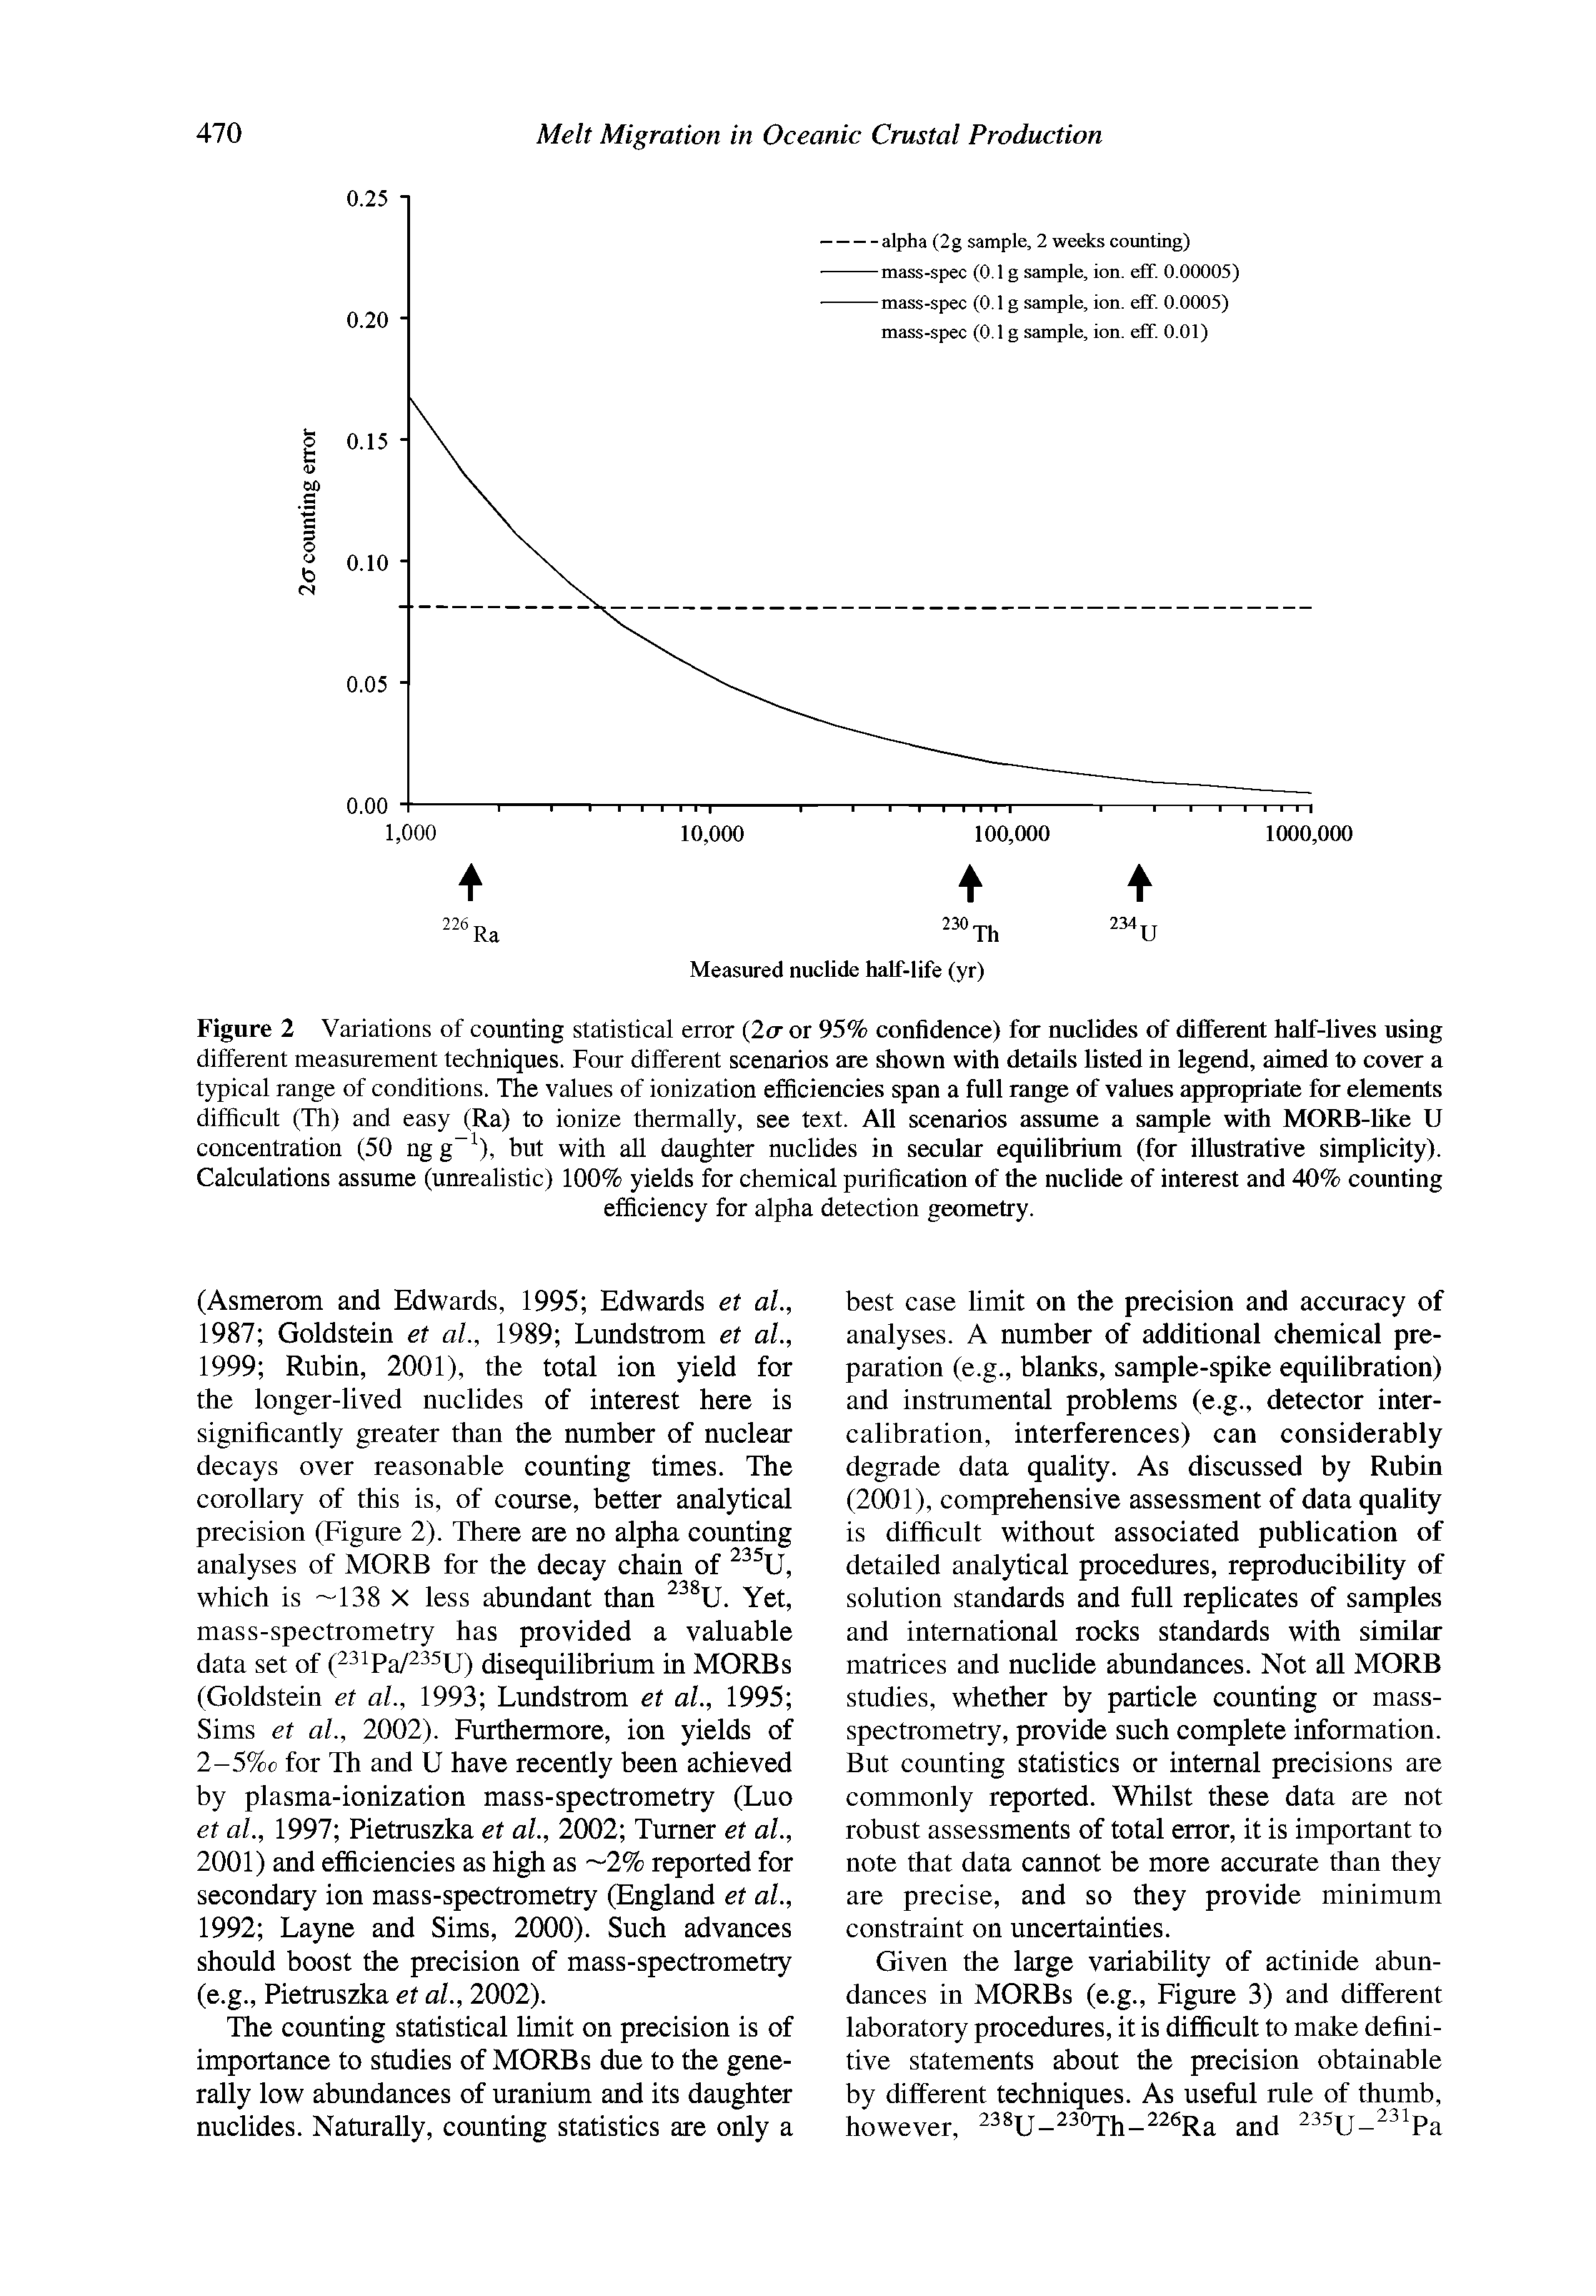 Figure 2 Variations of counting statistical error (2cr or 95% confidence) for nuclides of different half-lives using different measurement techniques. Four different scenarios are shown with details listed in legend, aimed to cover a typical range of conditions. The values of ionization efficiencies span a full range of values appropriate for elements difficult (Th) and easy (Ra) to ionize thermally, see text. All scenarios assume a sample with MORB-hke U concentration (50 ngg ), but with all daughter nuclides in secular equilibrium (for illustrative simplicity). Calculations assume (unrealistic) 100% yields for chemical purification of the nuclide of interest and 40% counting...